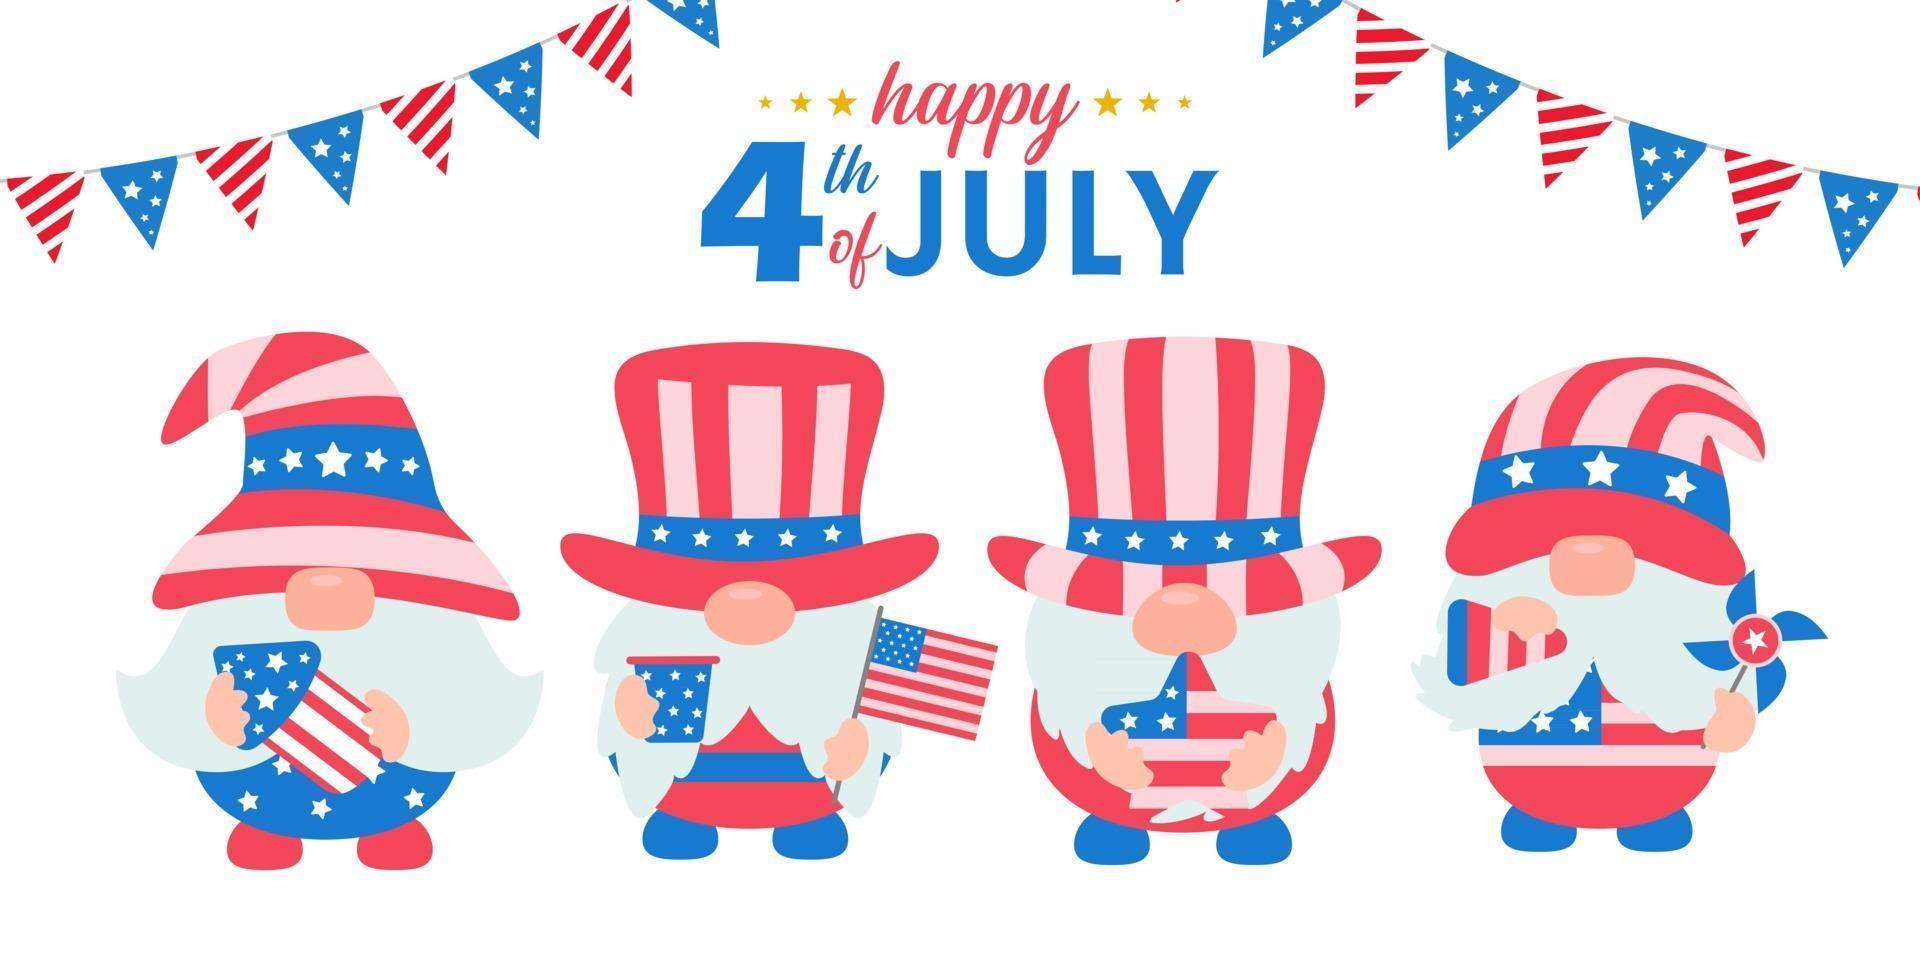 4th of july Gnomes wore an American flag costume to celebrate Independence Day vector